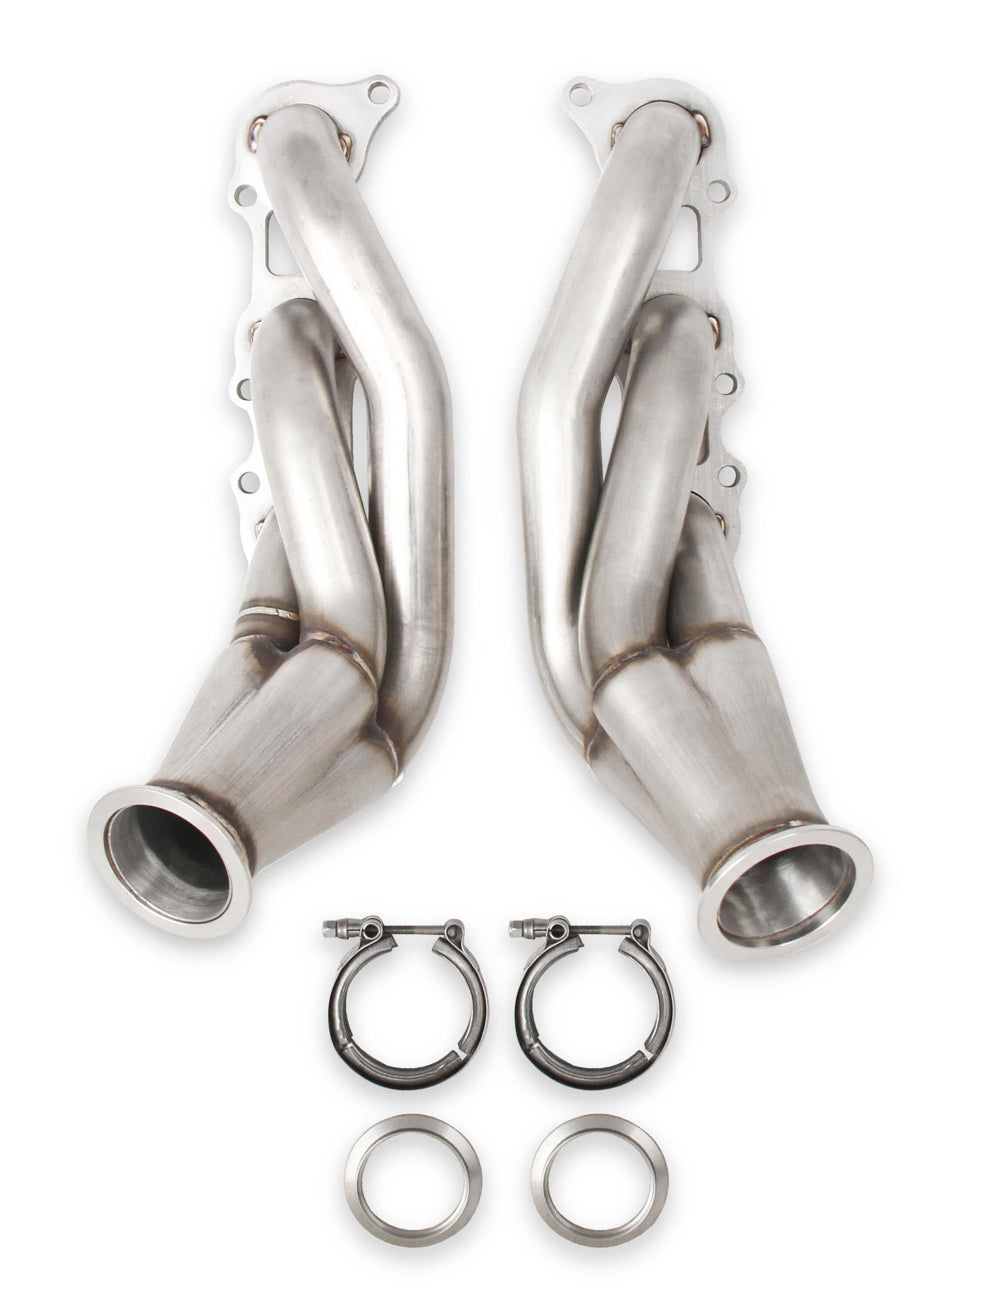 Exhaust Turbo Header Set Ford 5.0L Coyote